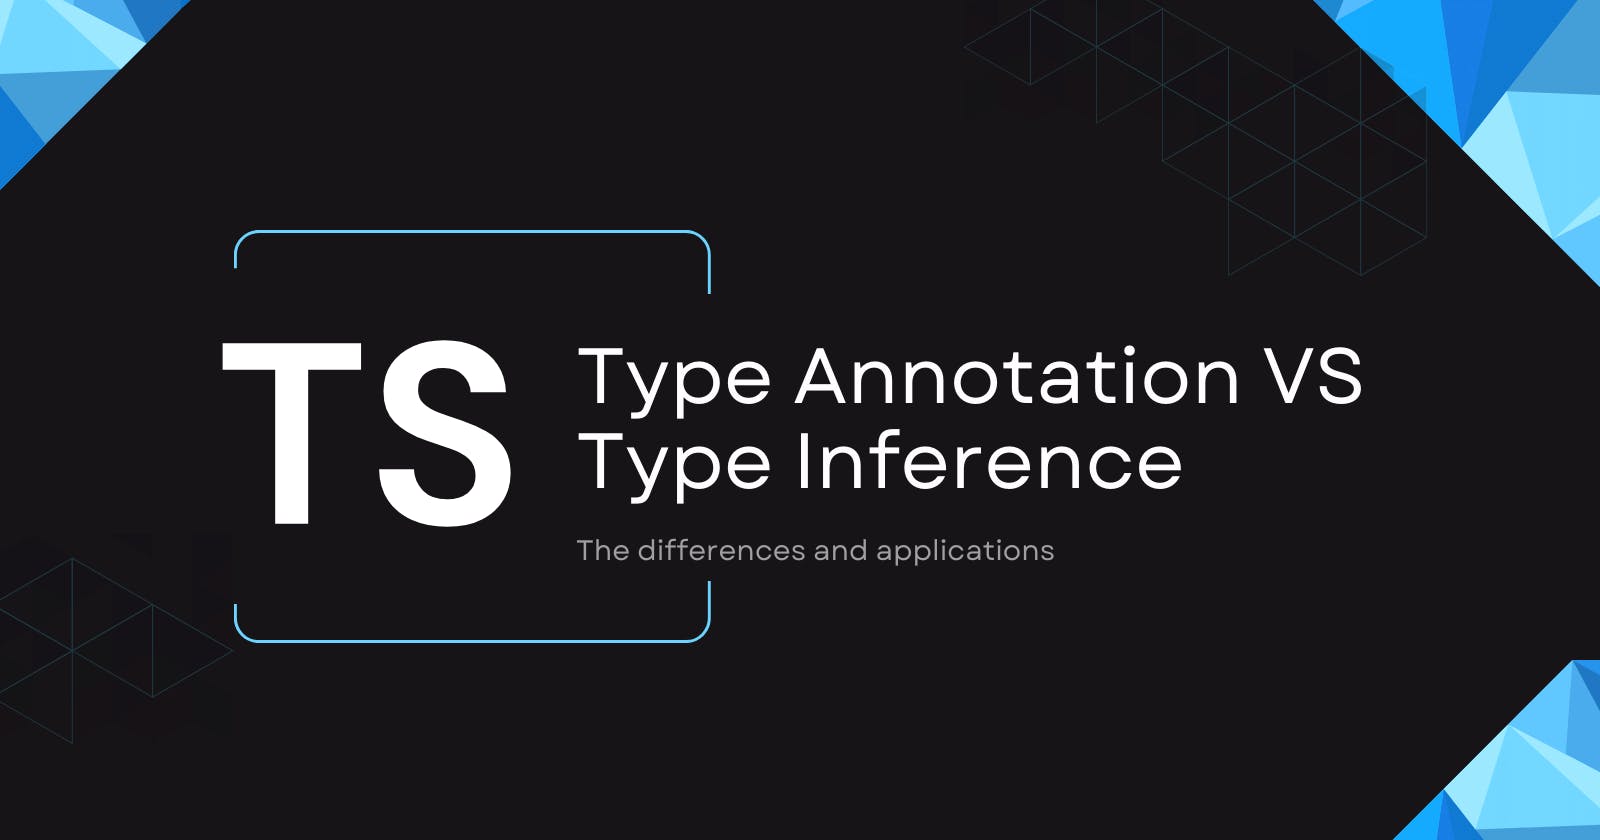 Type Annotation VS Type Inference